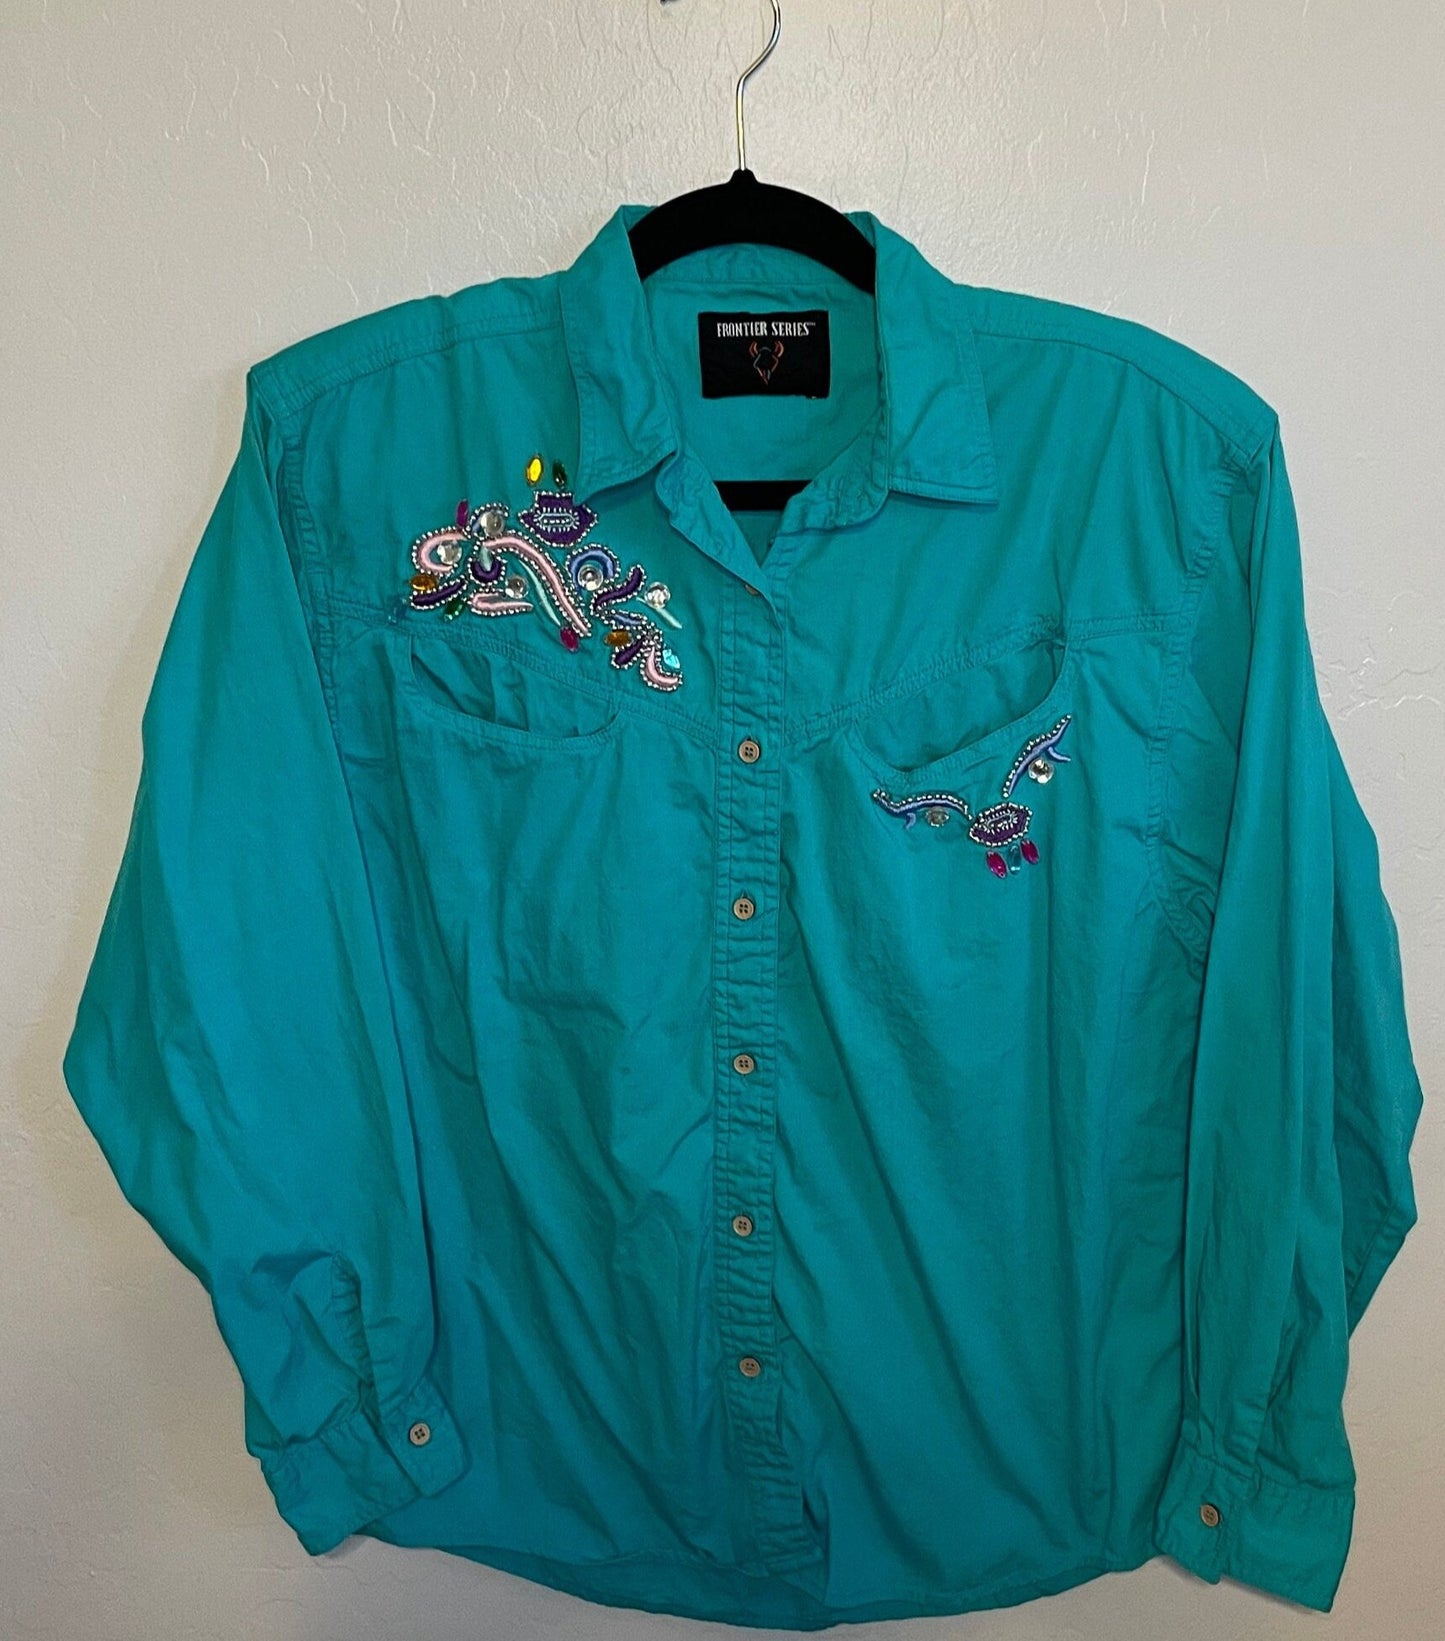 Vintage Teal Long Sleeve with Embroidery